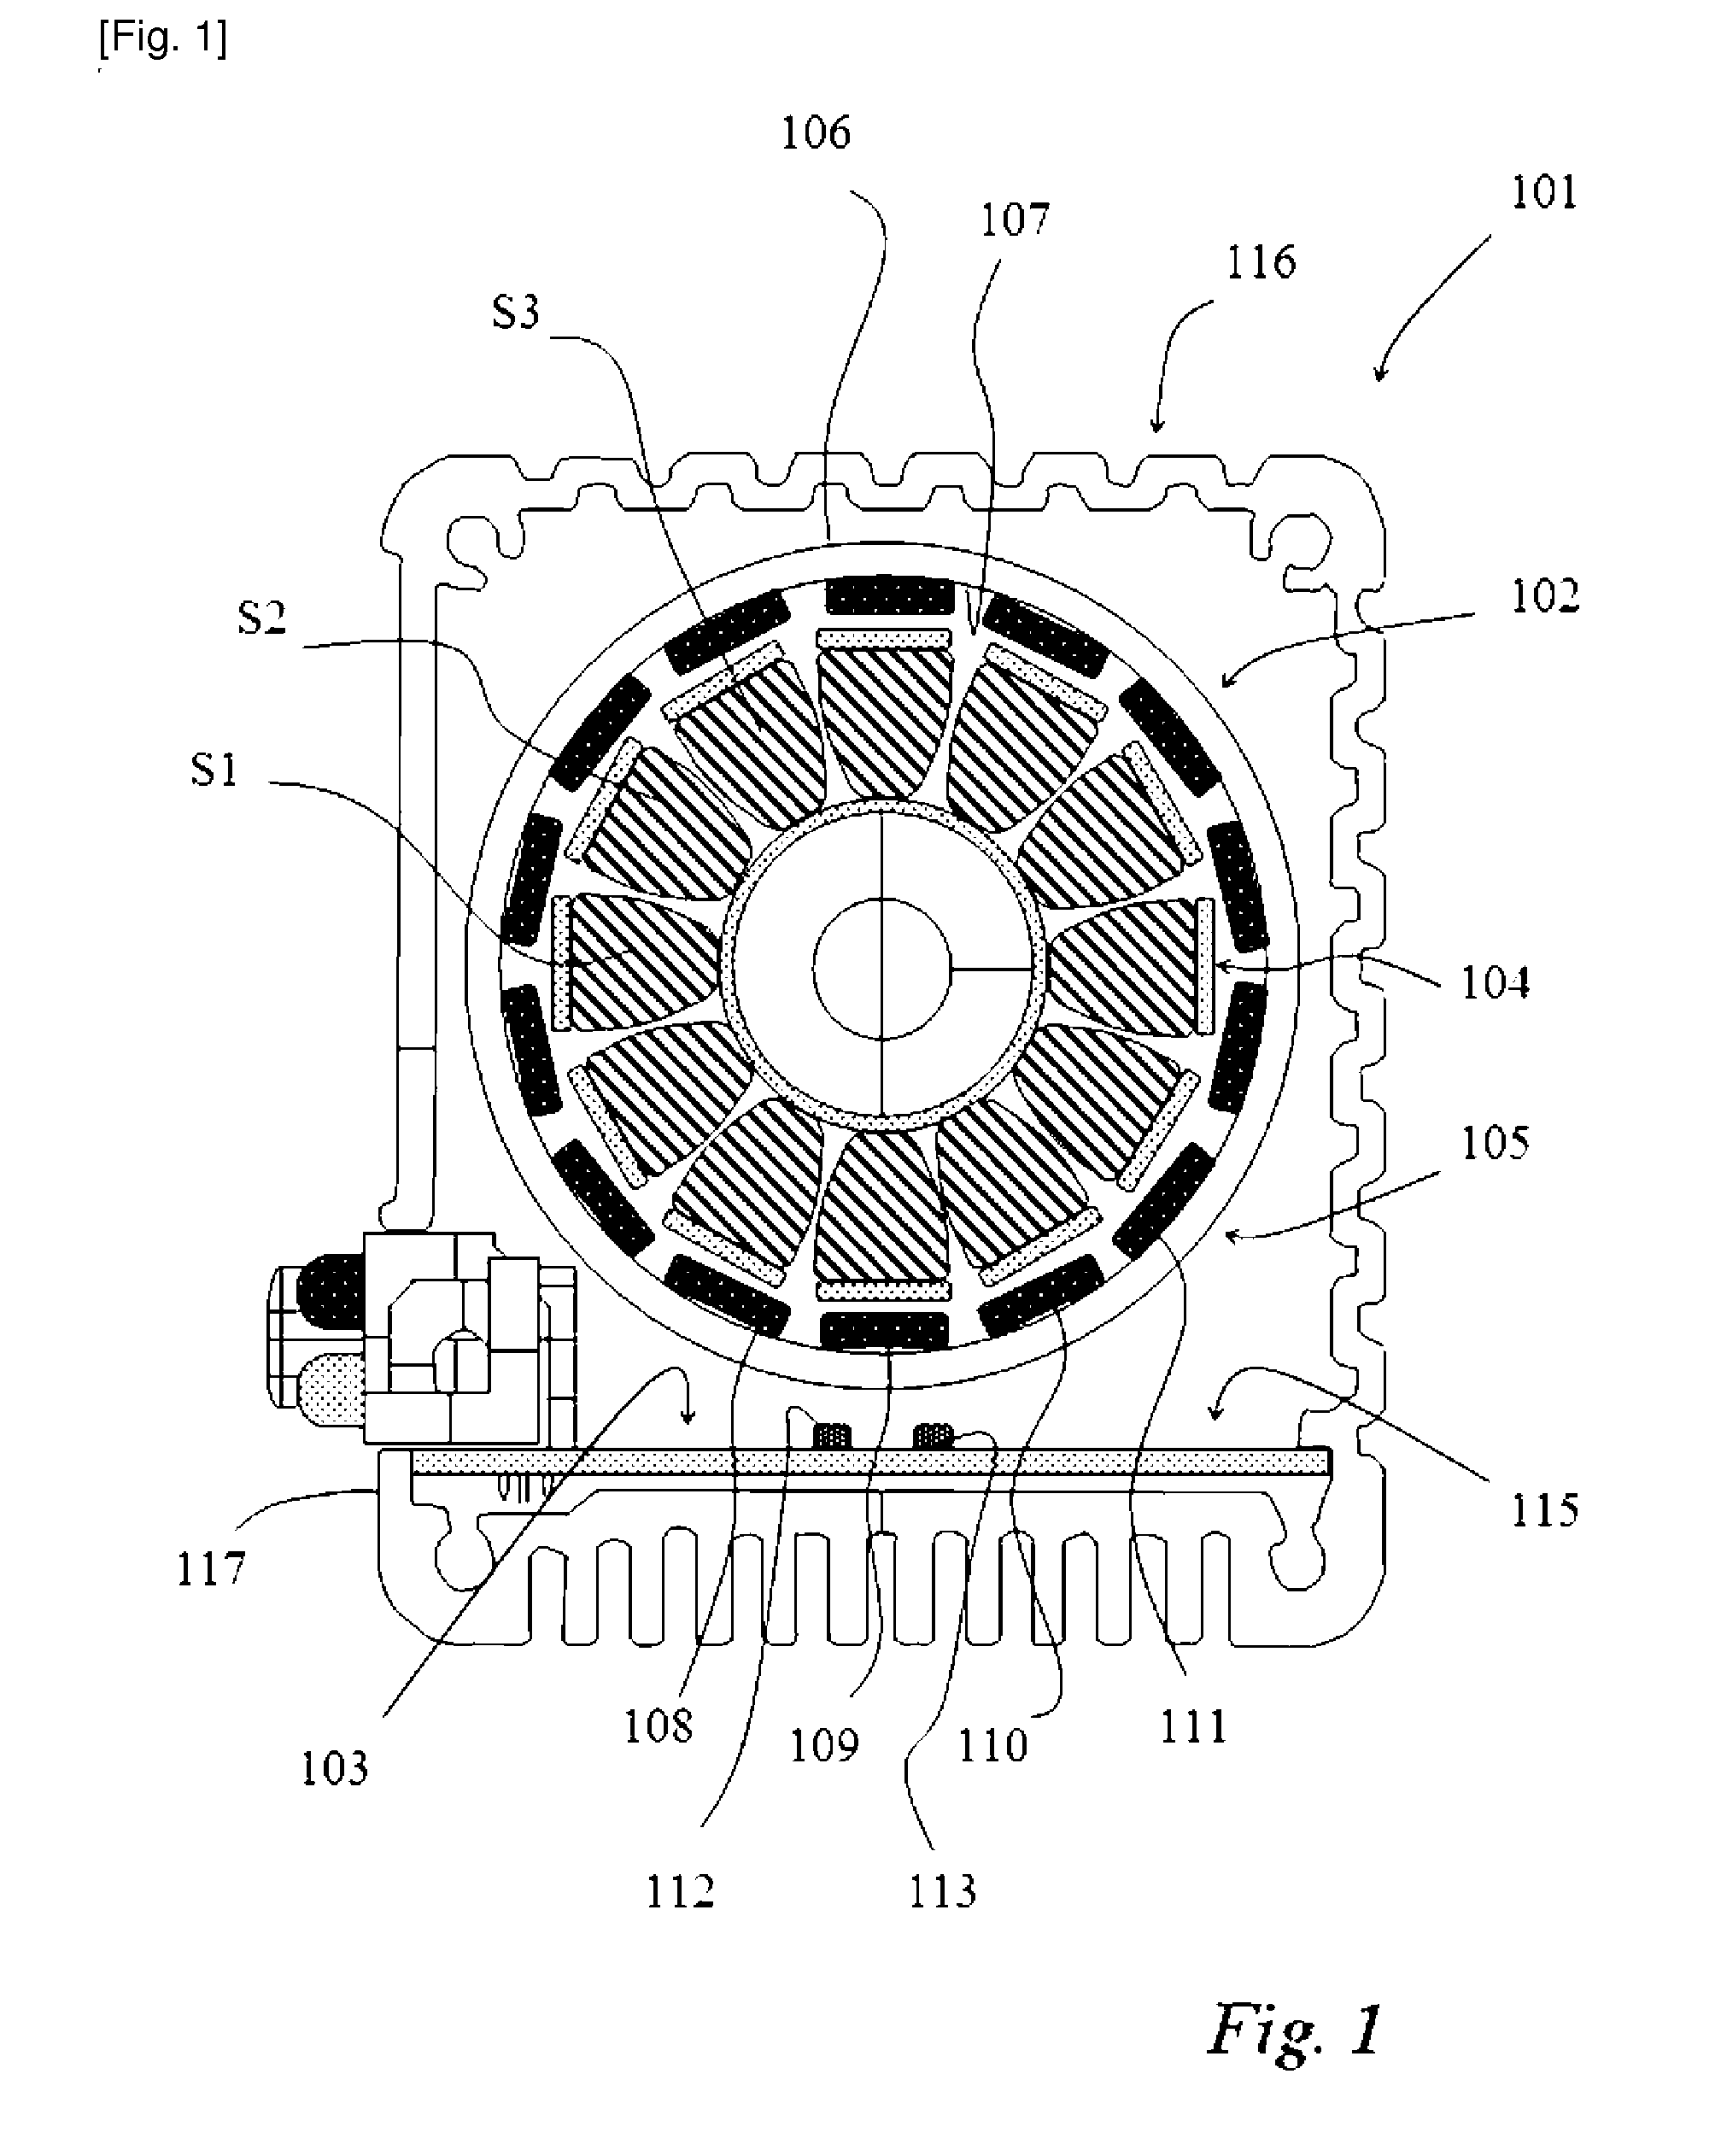 Motor assembly comprising a brushless DC motor with control electronics